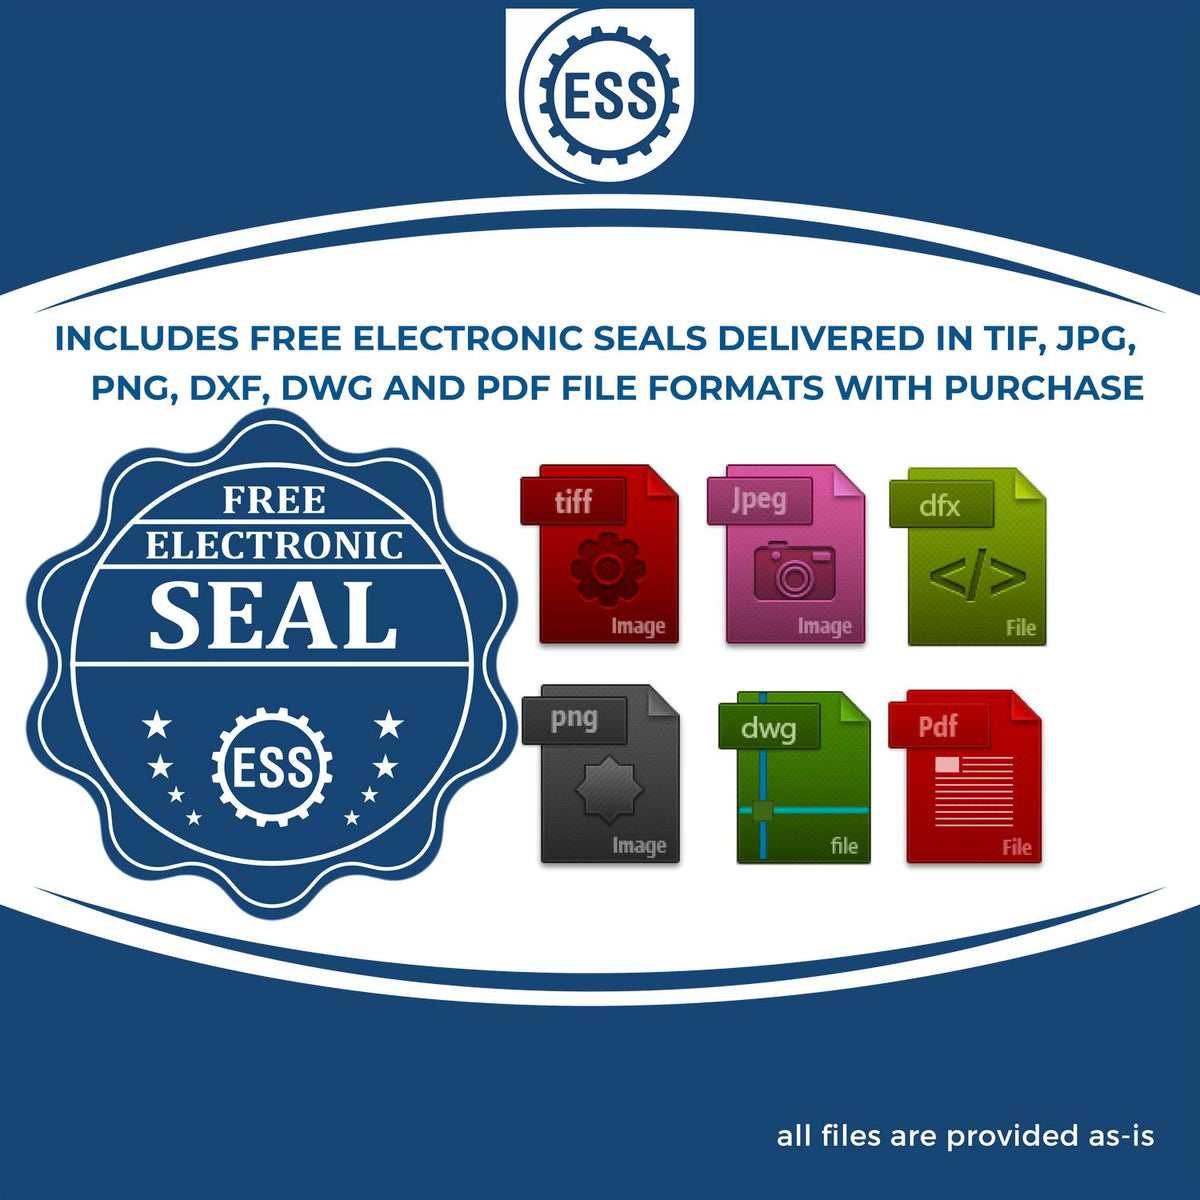 An infographic for the free electronic seal for the Wyoming Professional Engineer Seal Stamp illustrating the different file type icons such as DXF, DWG, TIF, JPG and PNG.